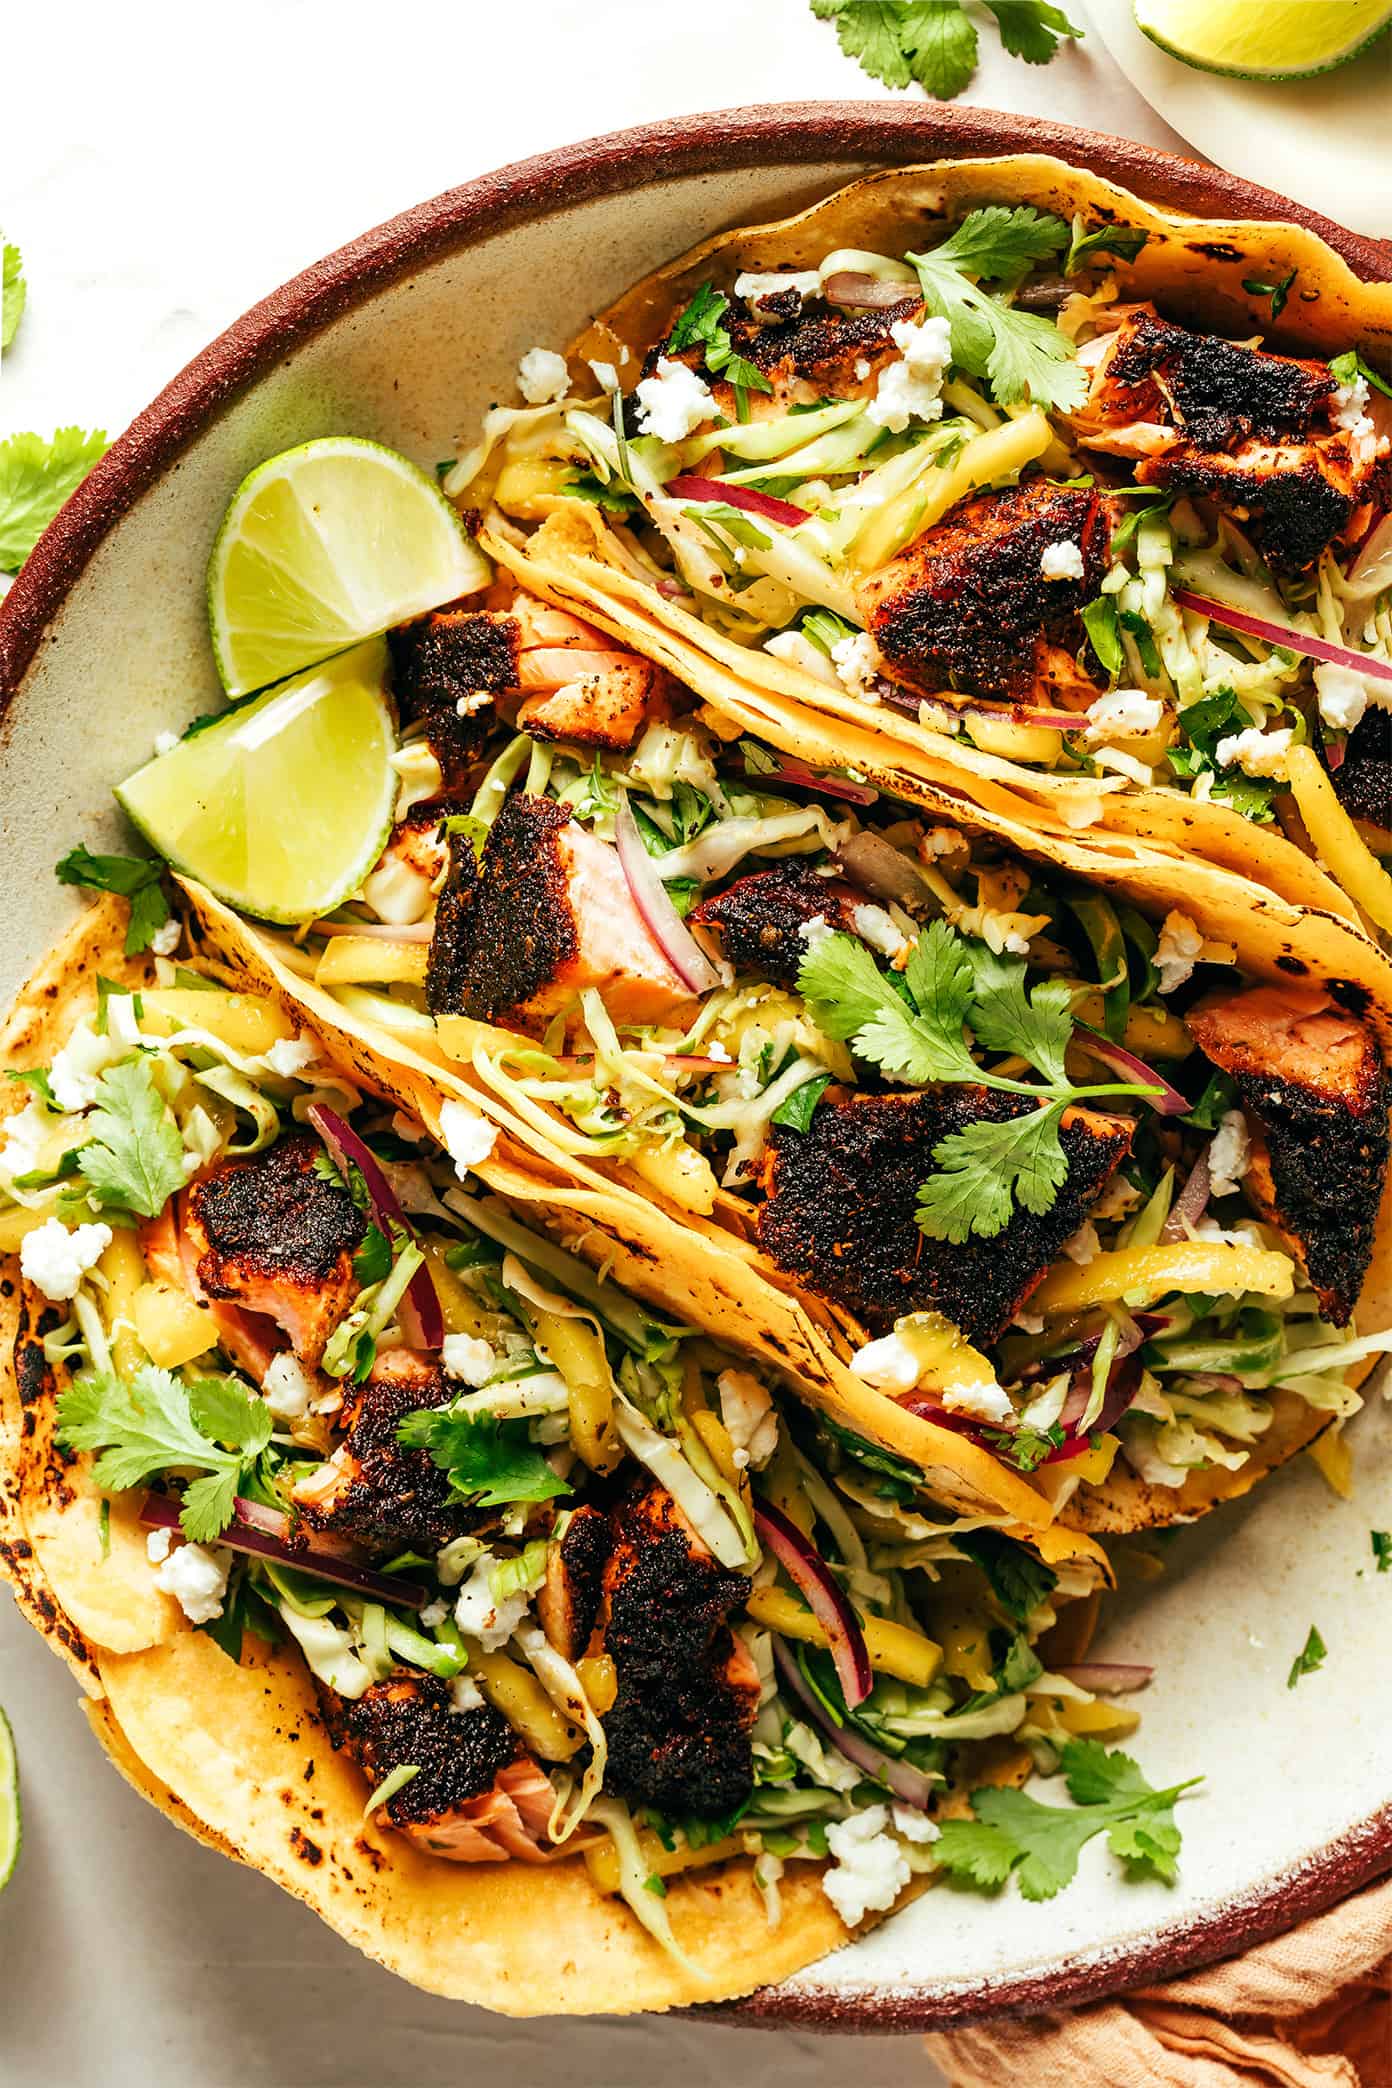 Blackened Salmon Tacos with Lime